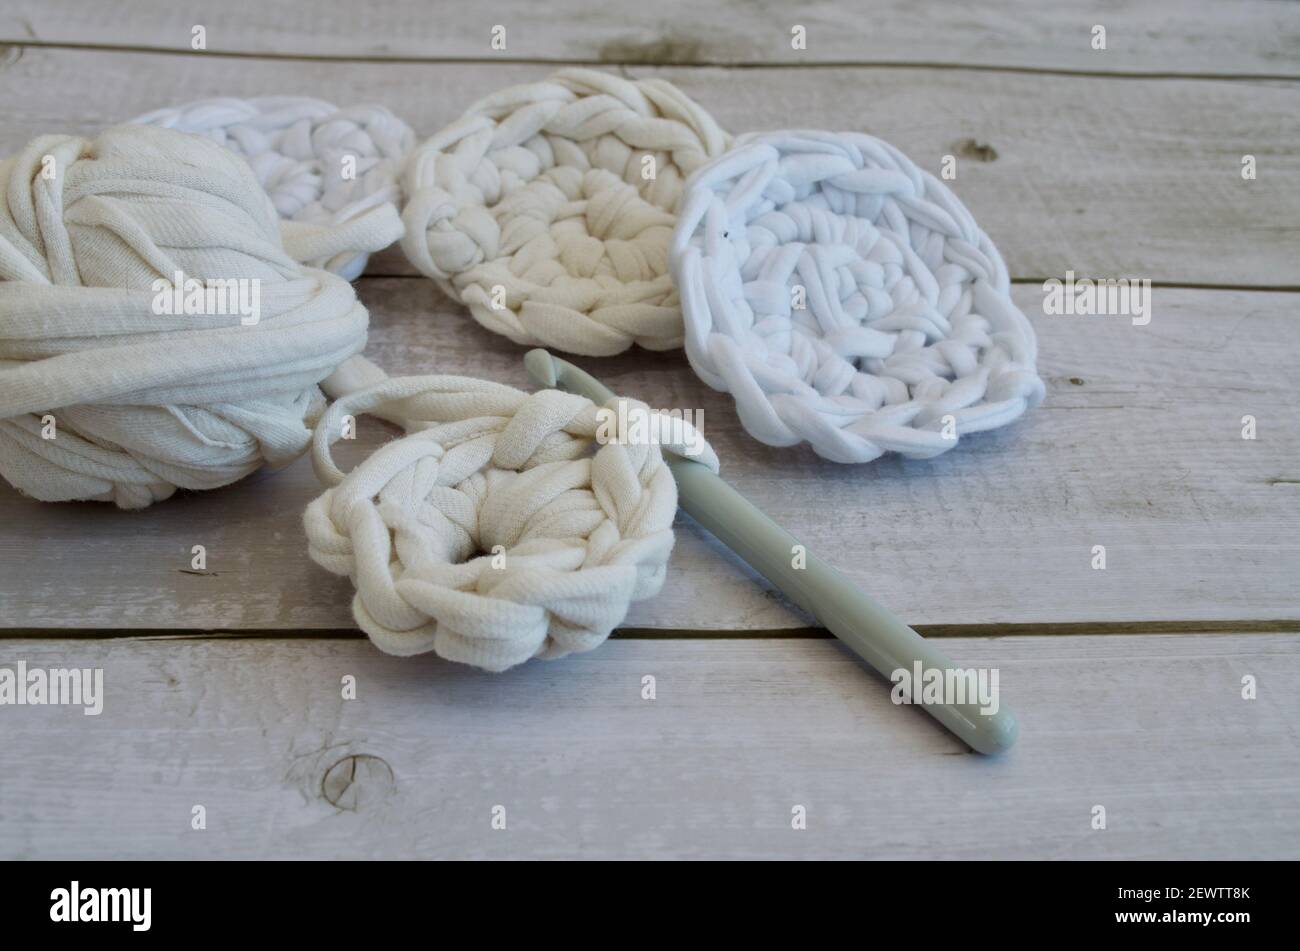 Skein of ribbon yarn with crochet hooks and crocheted coasters in light color Stock Photo